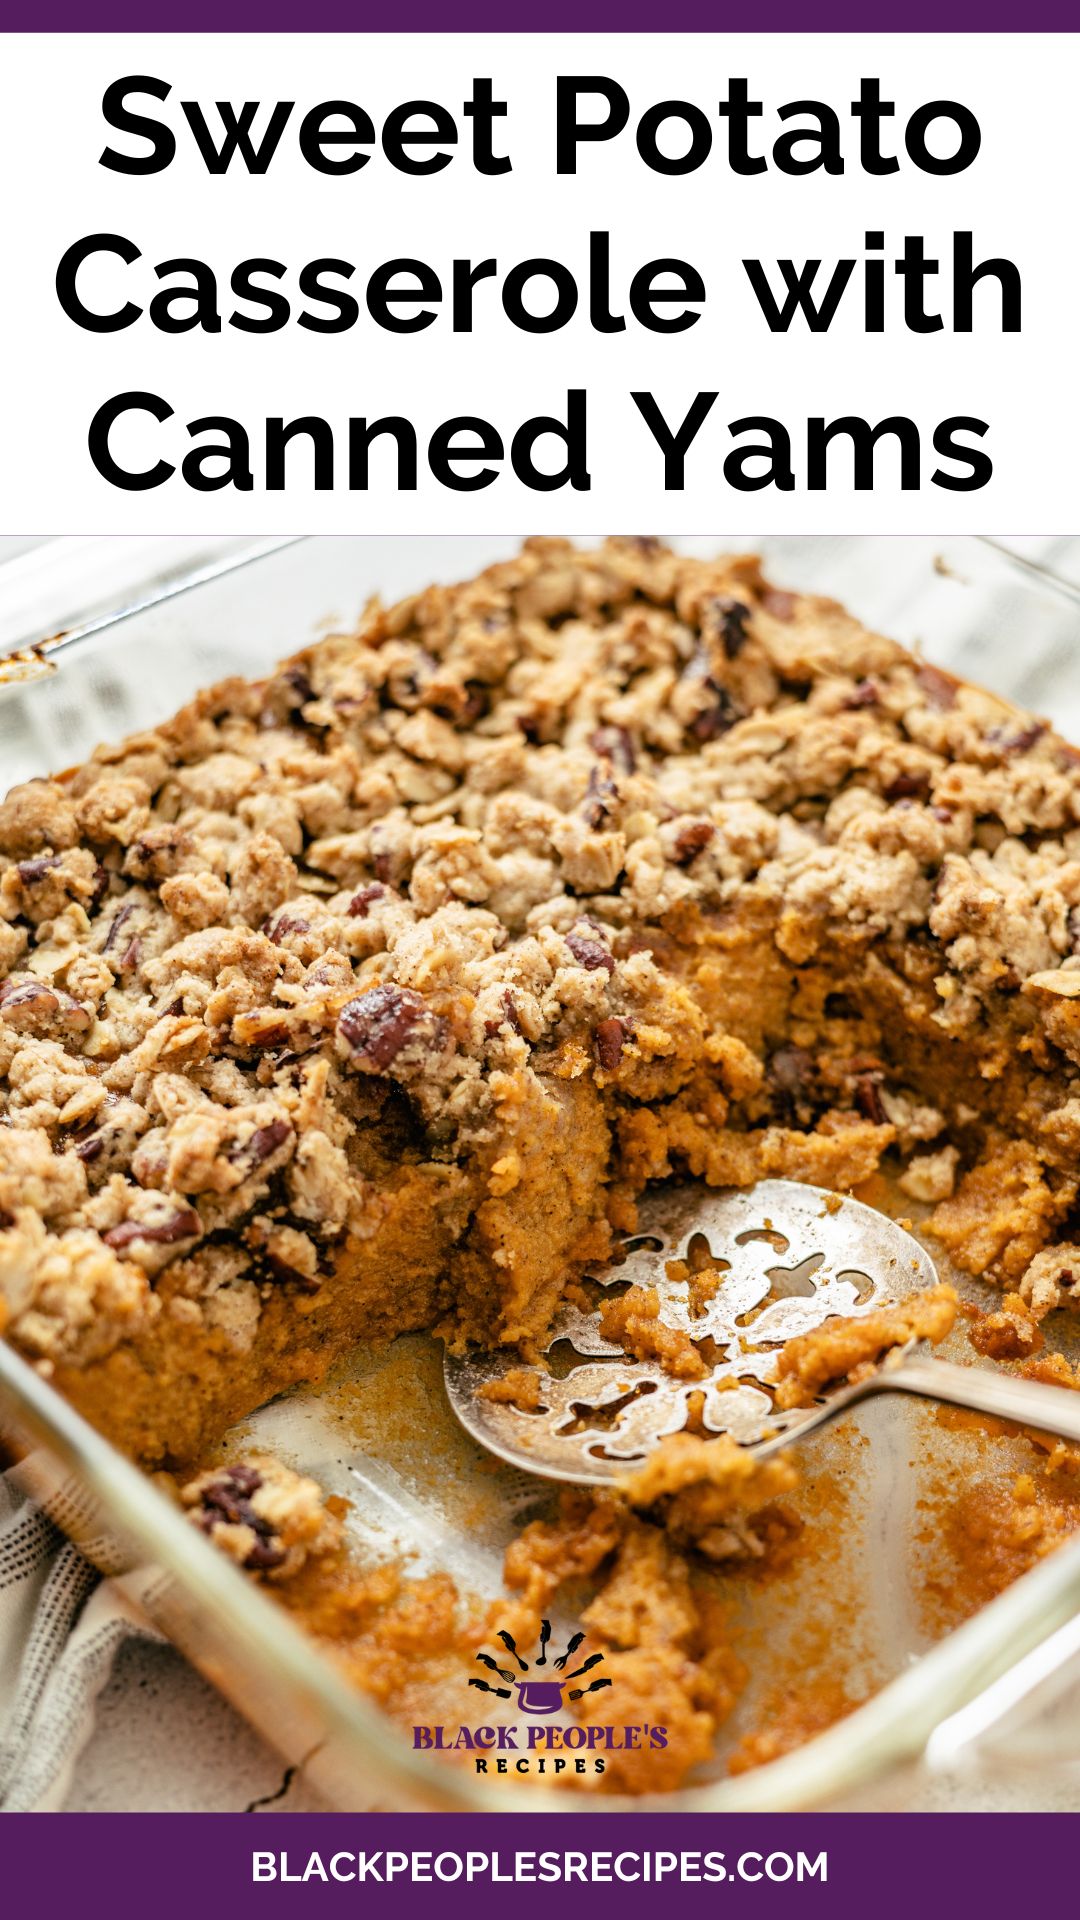 Sweet Potato Casserole with Canned Yams - blackpeoplesrecipes.com